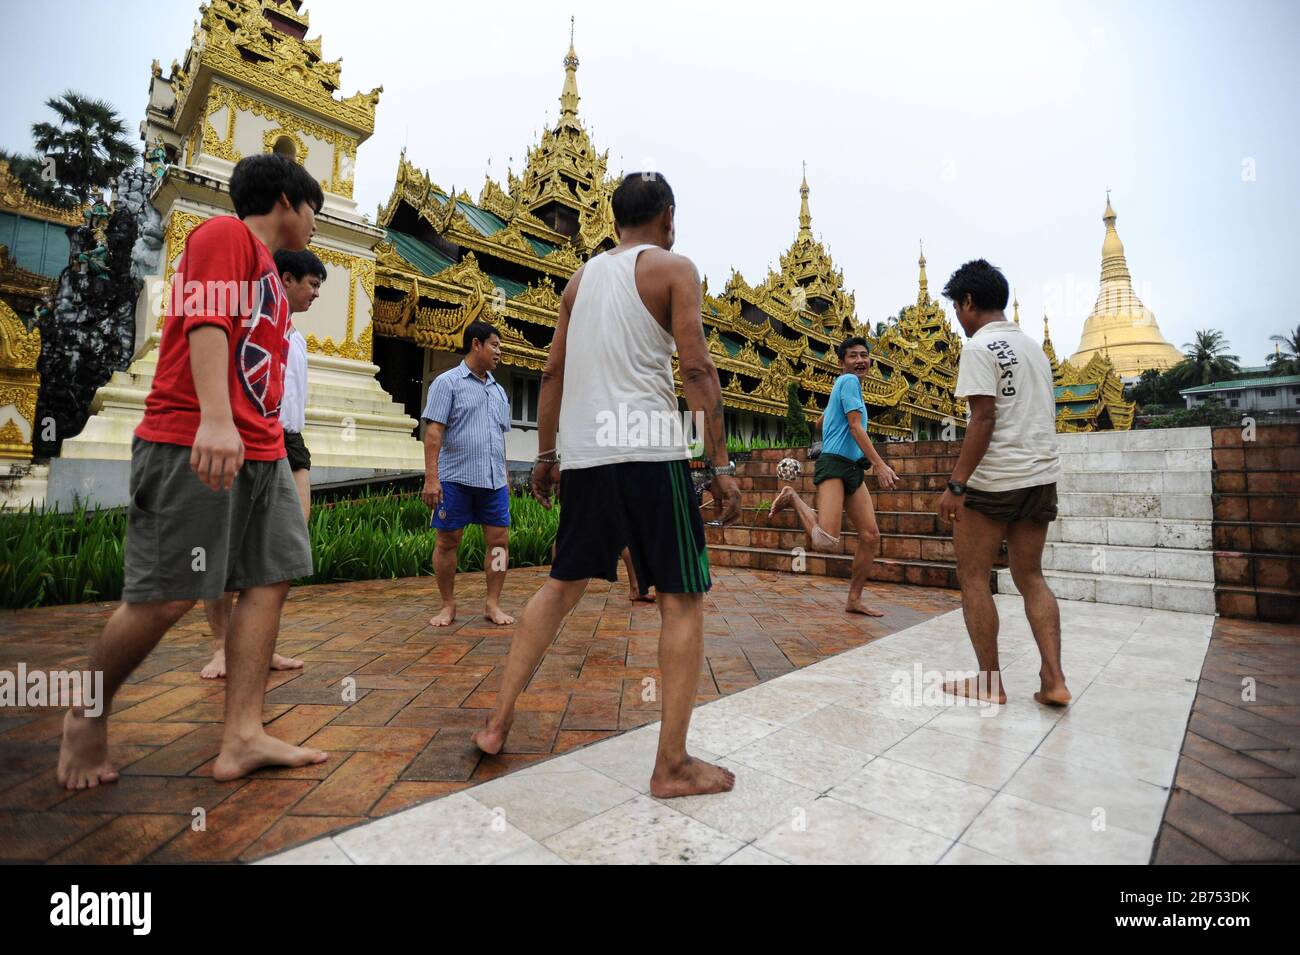 25.08.2013, Yangon, Myanmar, Asia - A group of men play in front of the  temple area of the Shwedagon Pagoda Chinlone. The game is the national sport  of the South East Asian